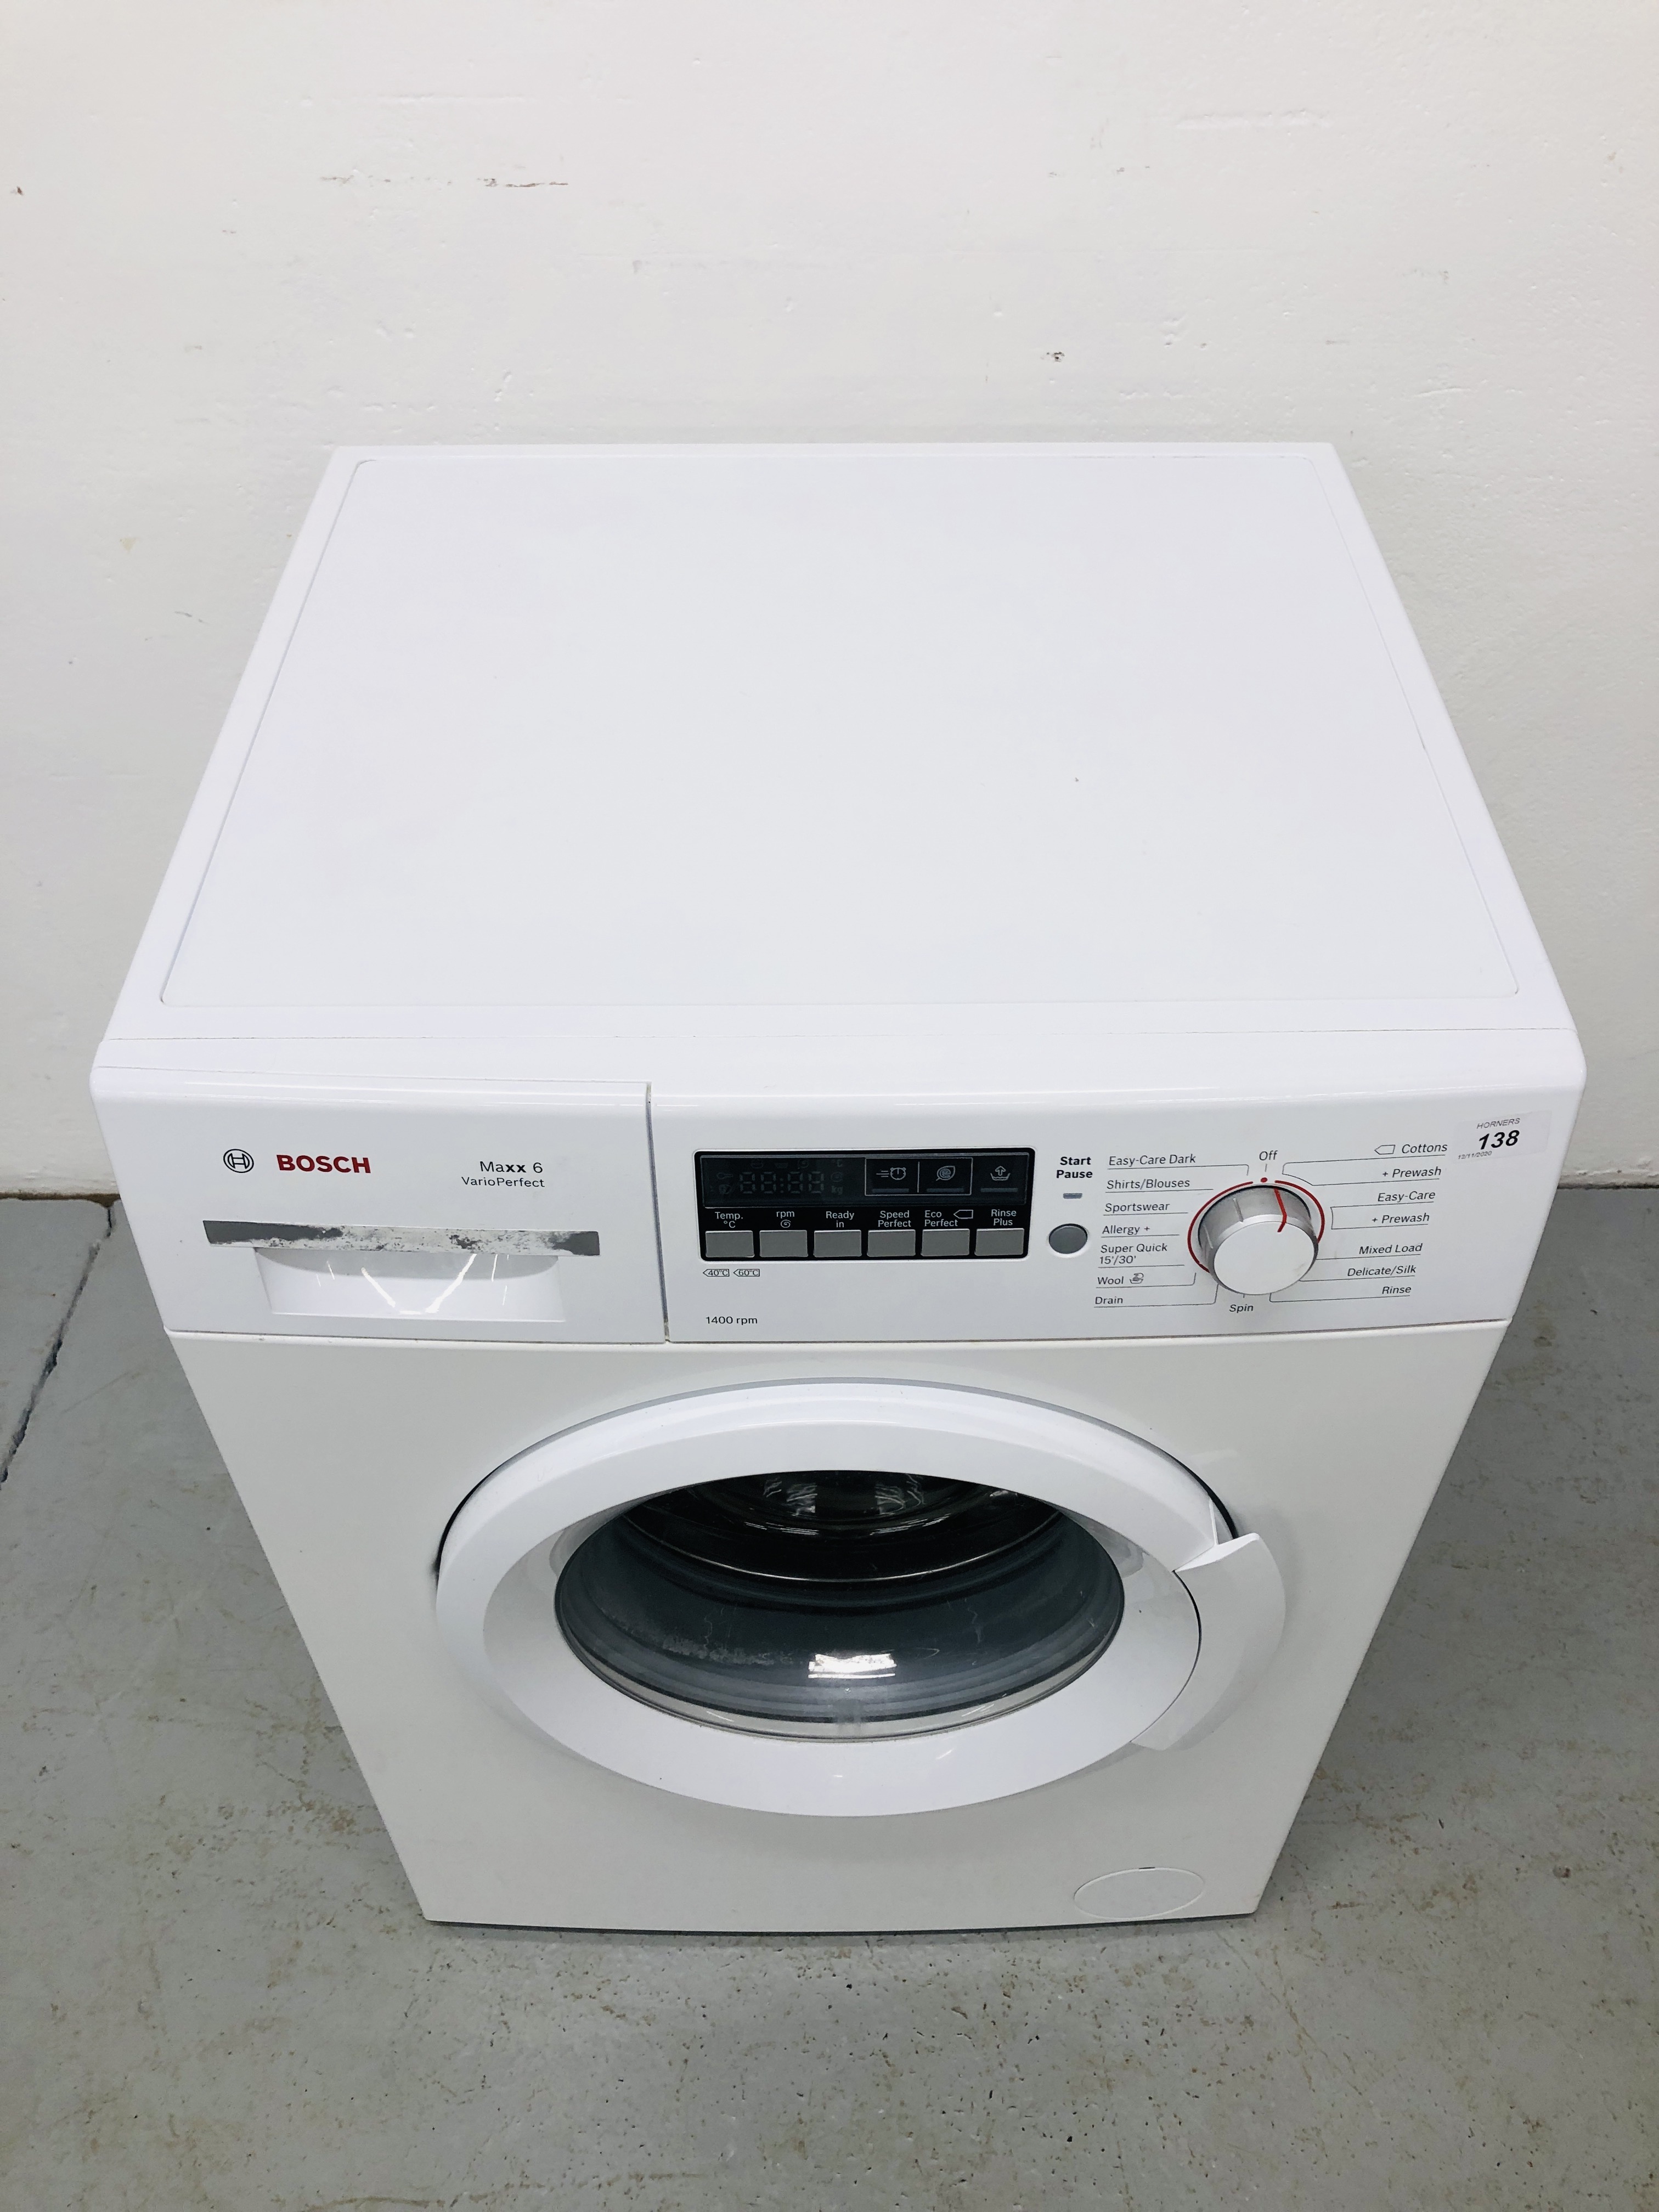 A BOSCH "MAXX 6 VARIO PERFECT" WASHING MACHINE - SOLD AS SEEN - Image 2 of 7